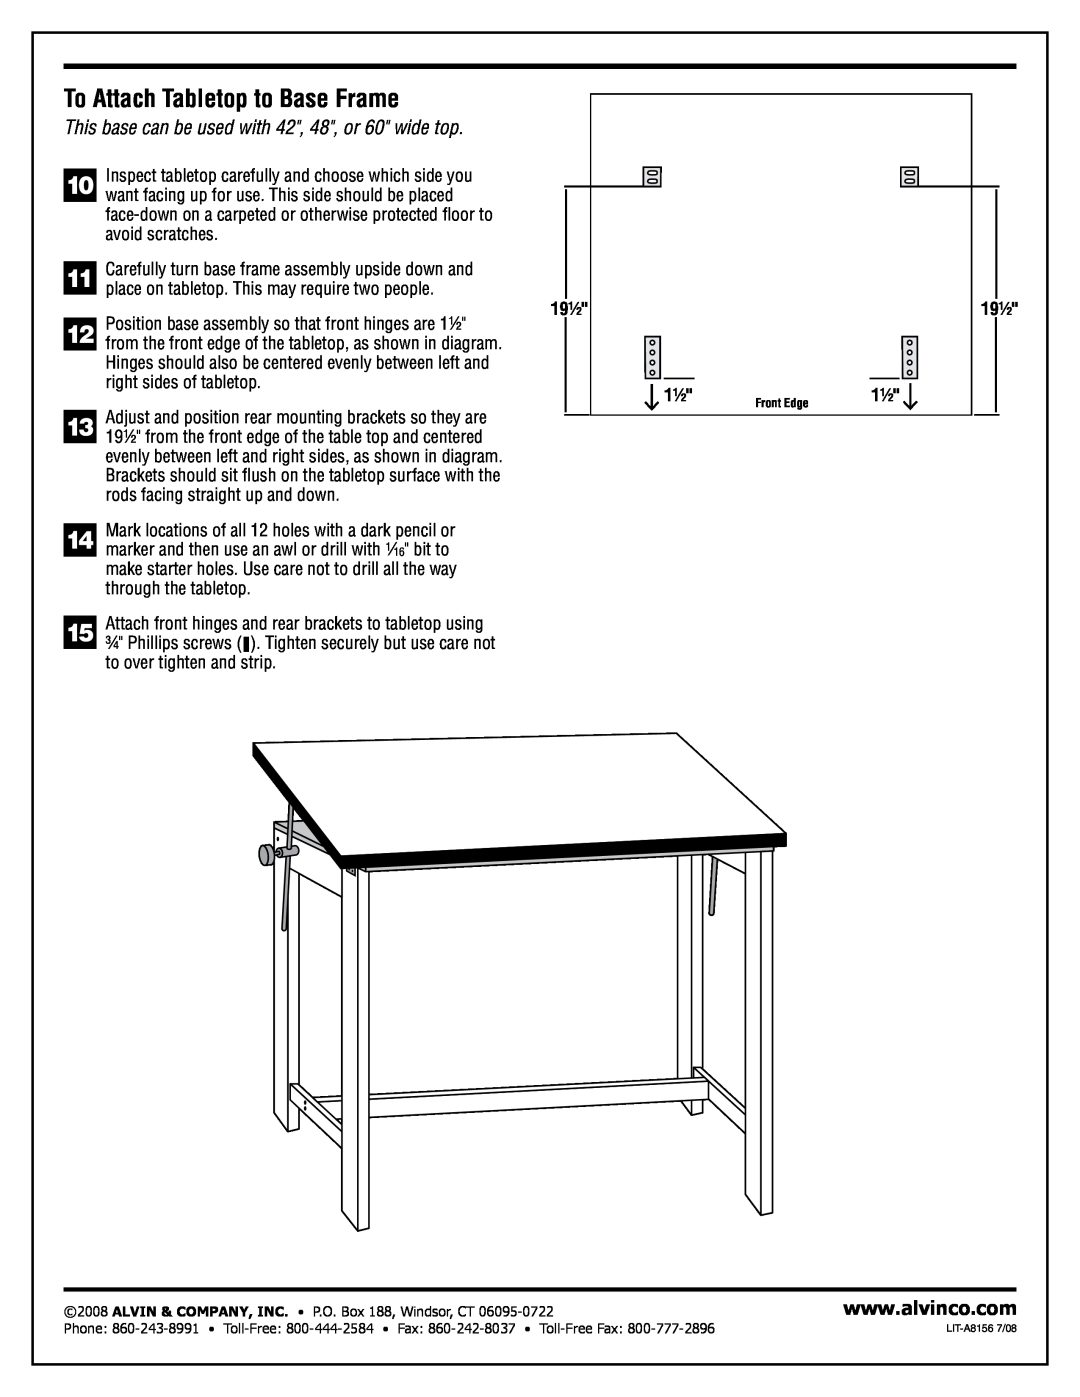 Alvin Drafting Table manual To Attach Tabletop to Base Frame, This base can be used with 42, 48, or 60 wide top 